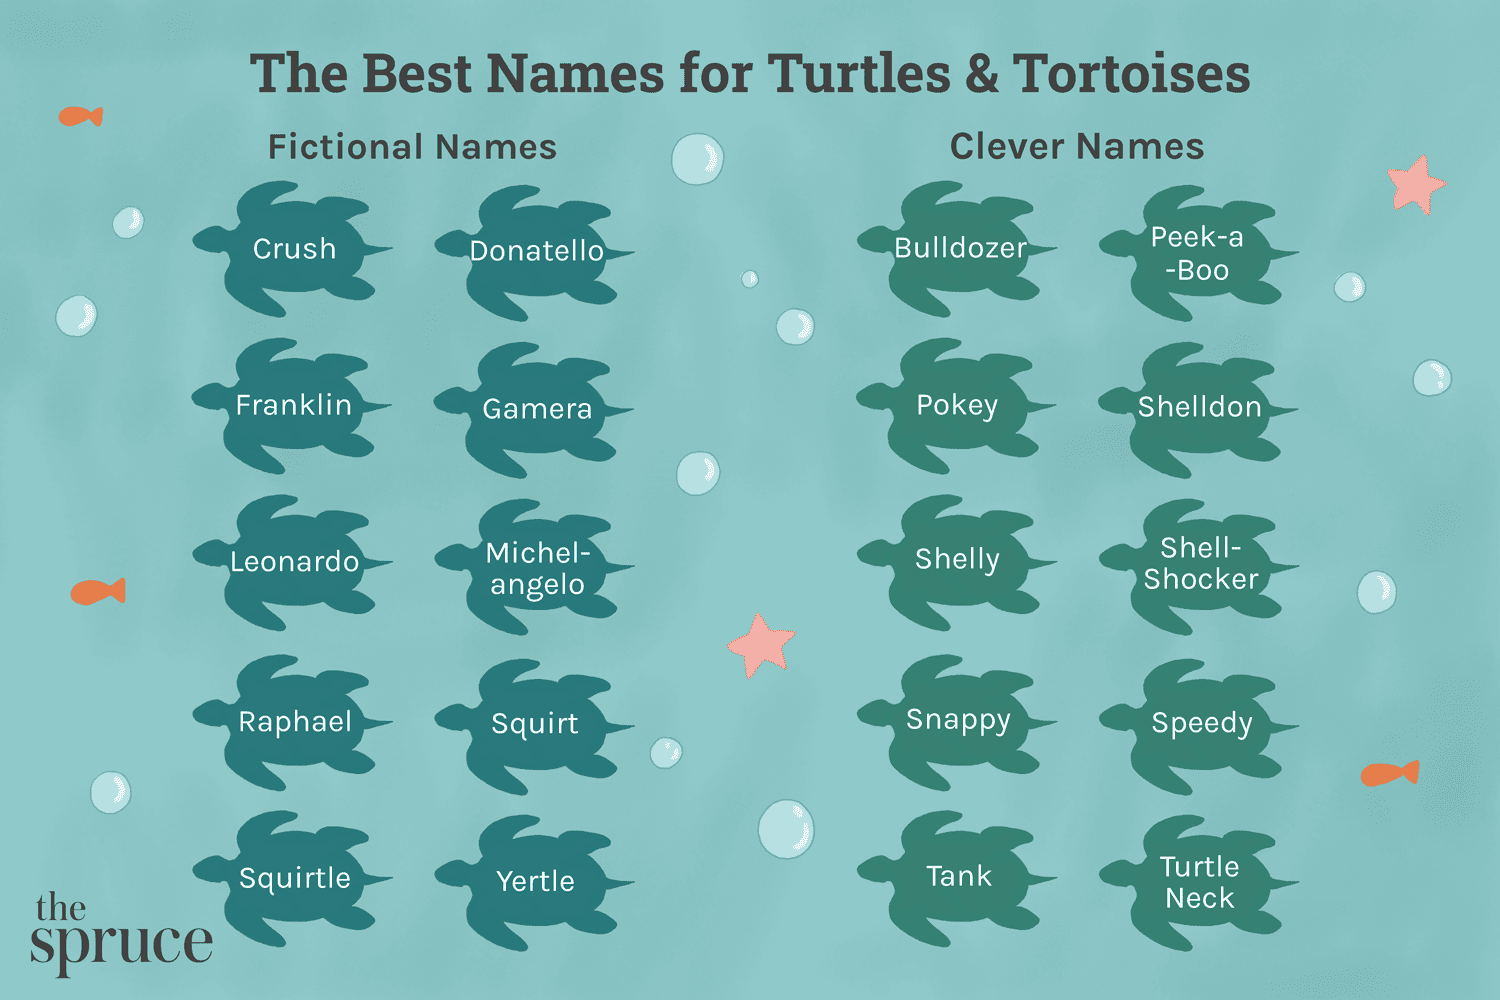 What are Good Names for Turtle